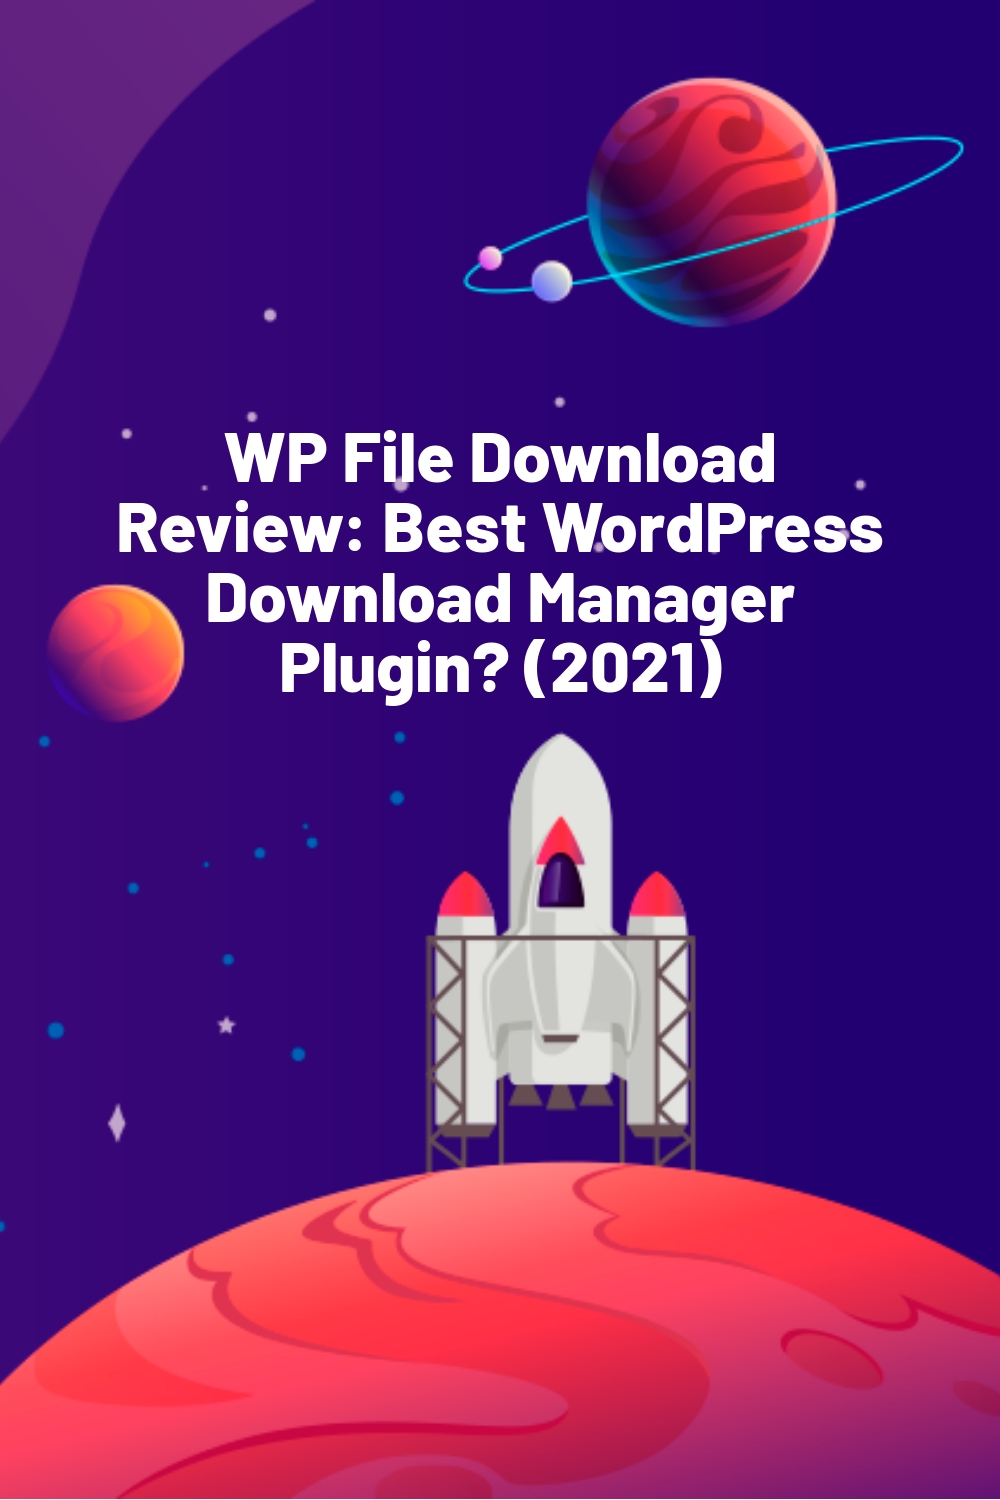 WP File Download Review: Best WordPress Download Manager Plugin? (2021)